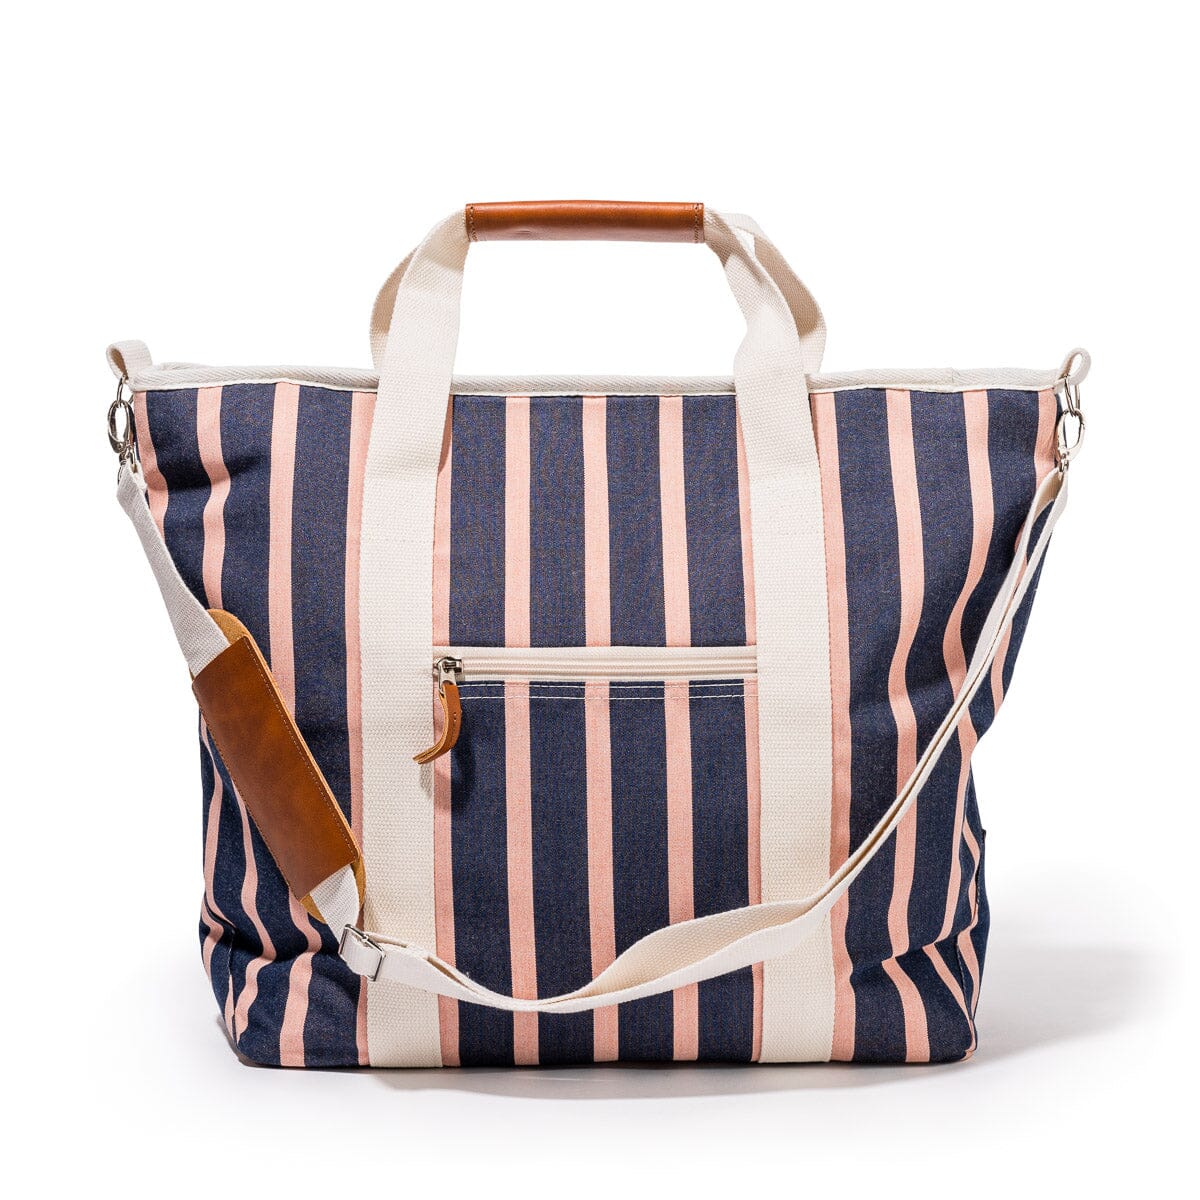 The Cooler Tote Bag - Monaco Navy And Pink Stripe Cooler Tote Business & Pleasure Co 